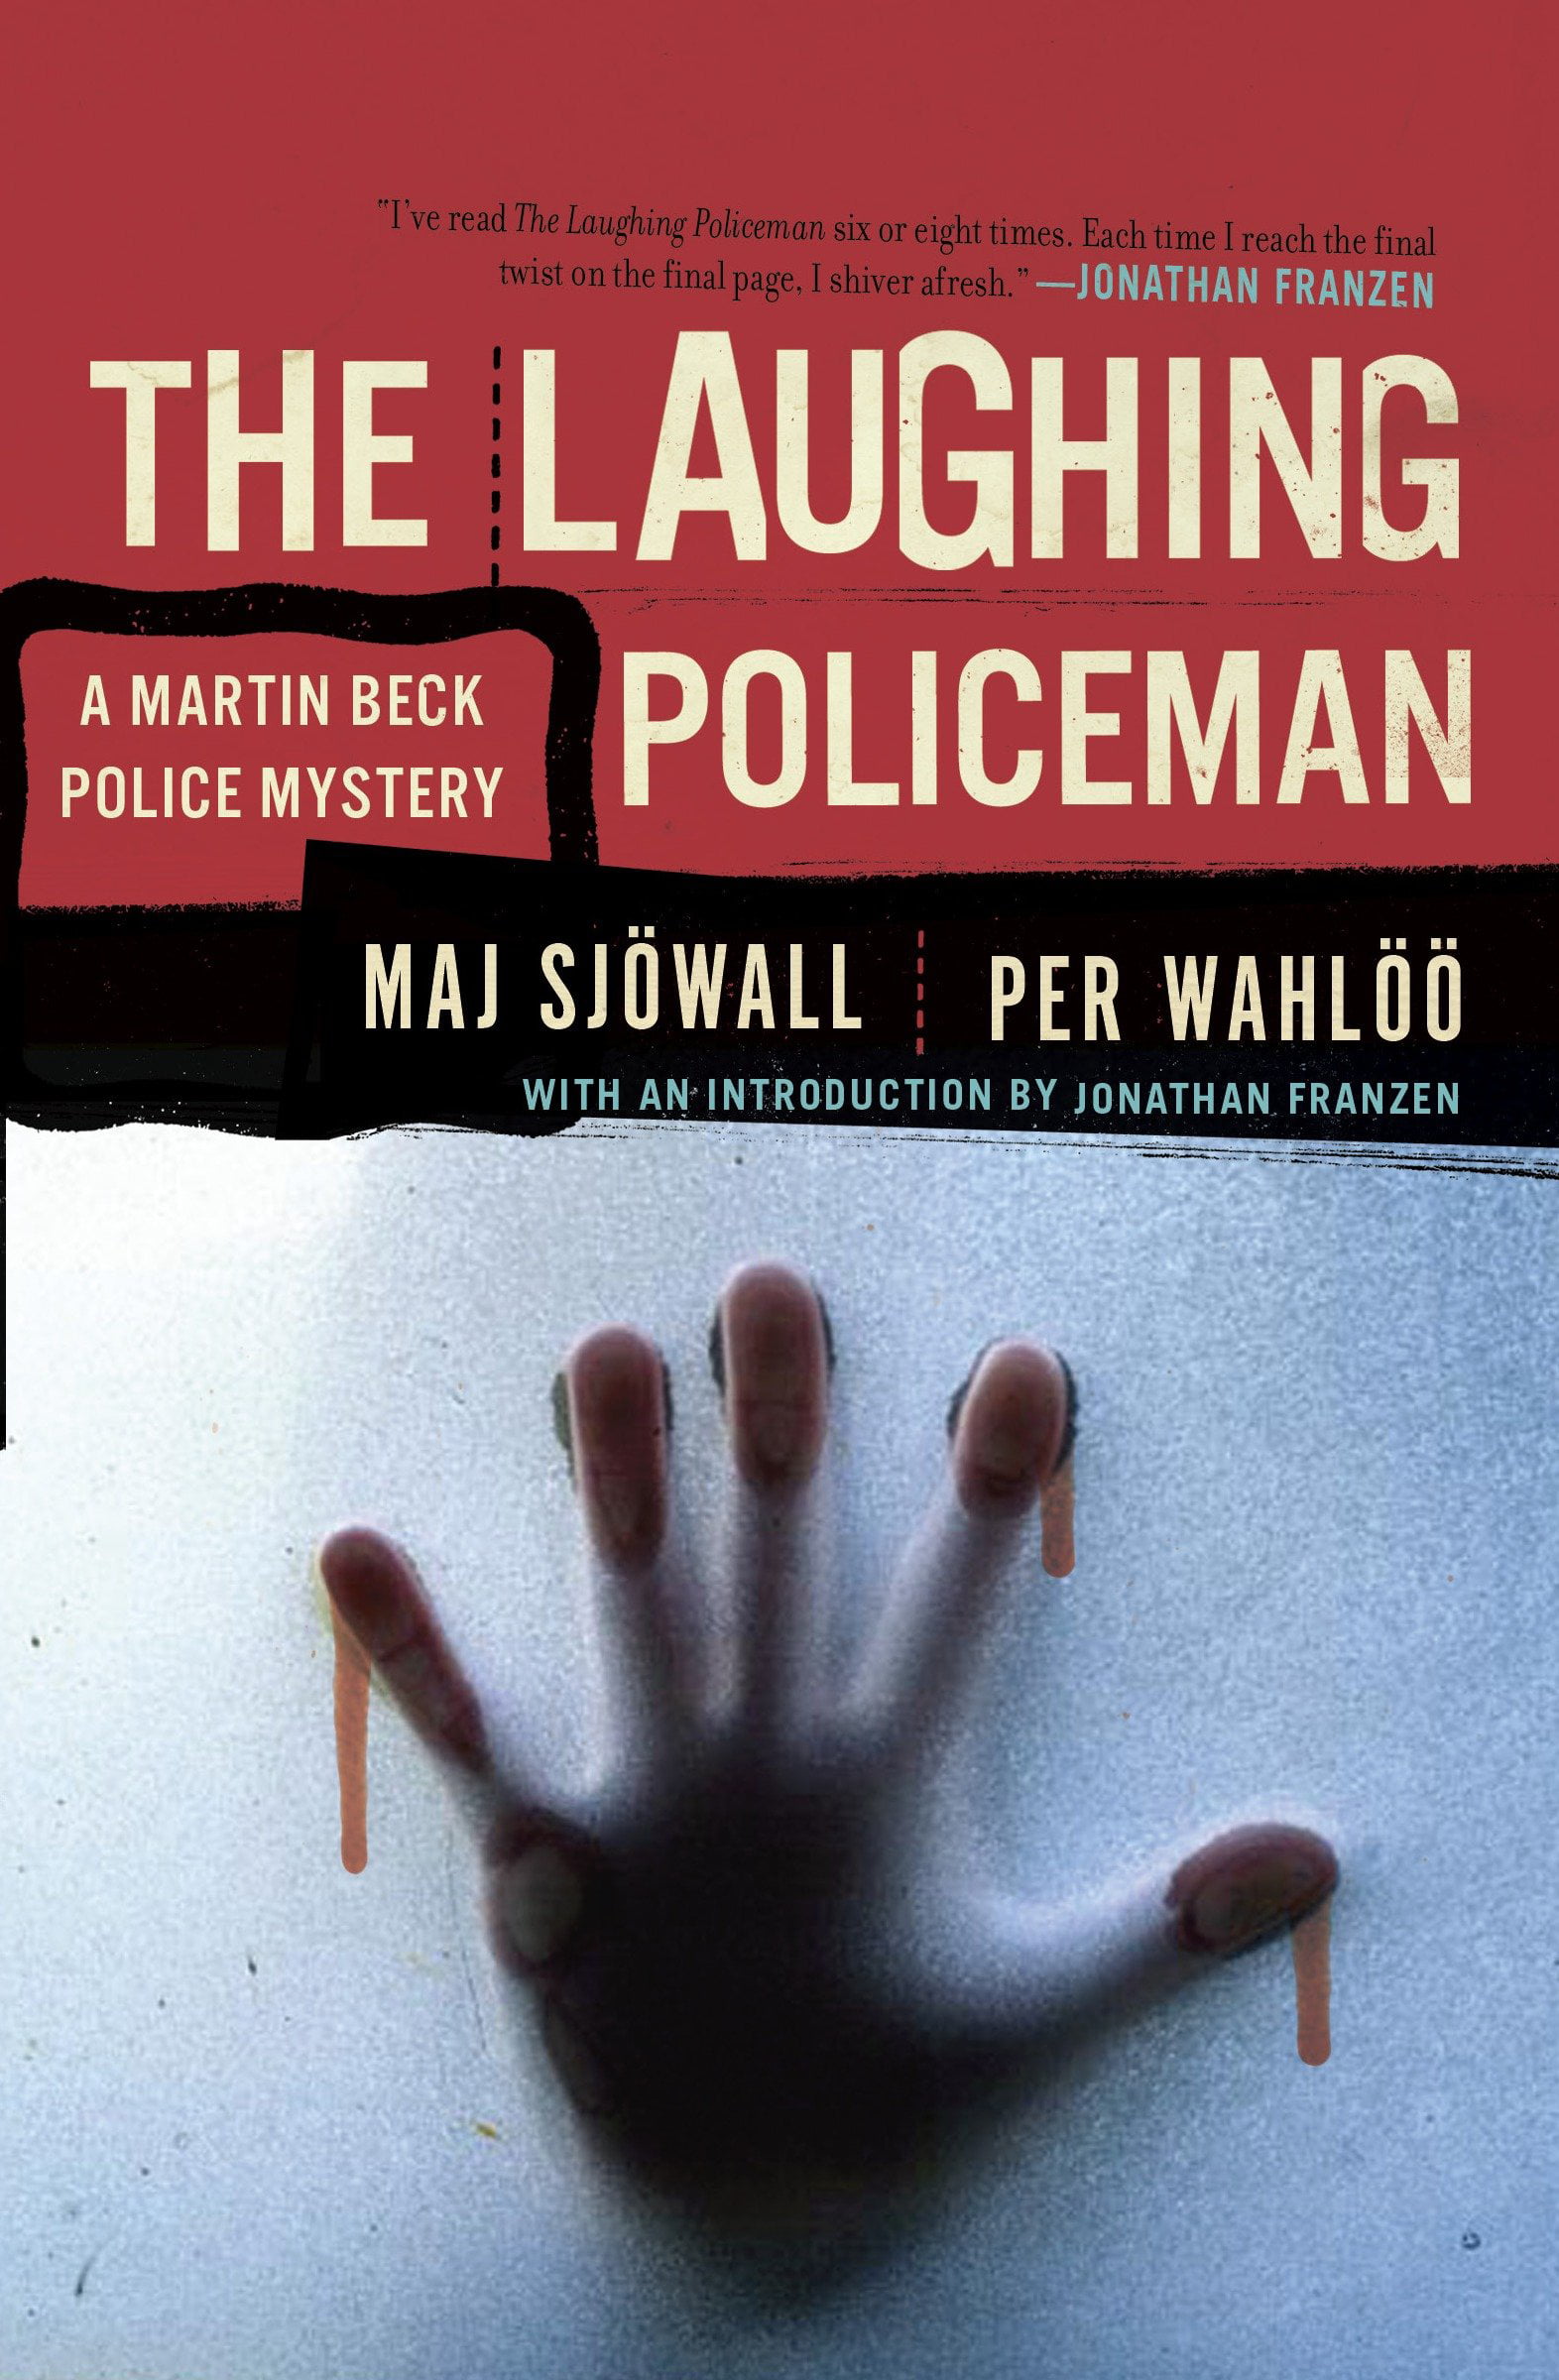 The Laughing Policeman A Martin Beck Police Mystery (4)